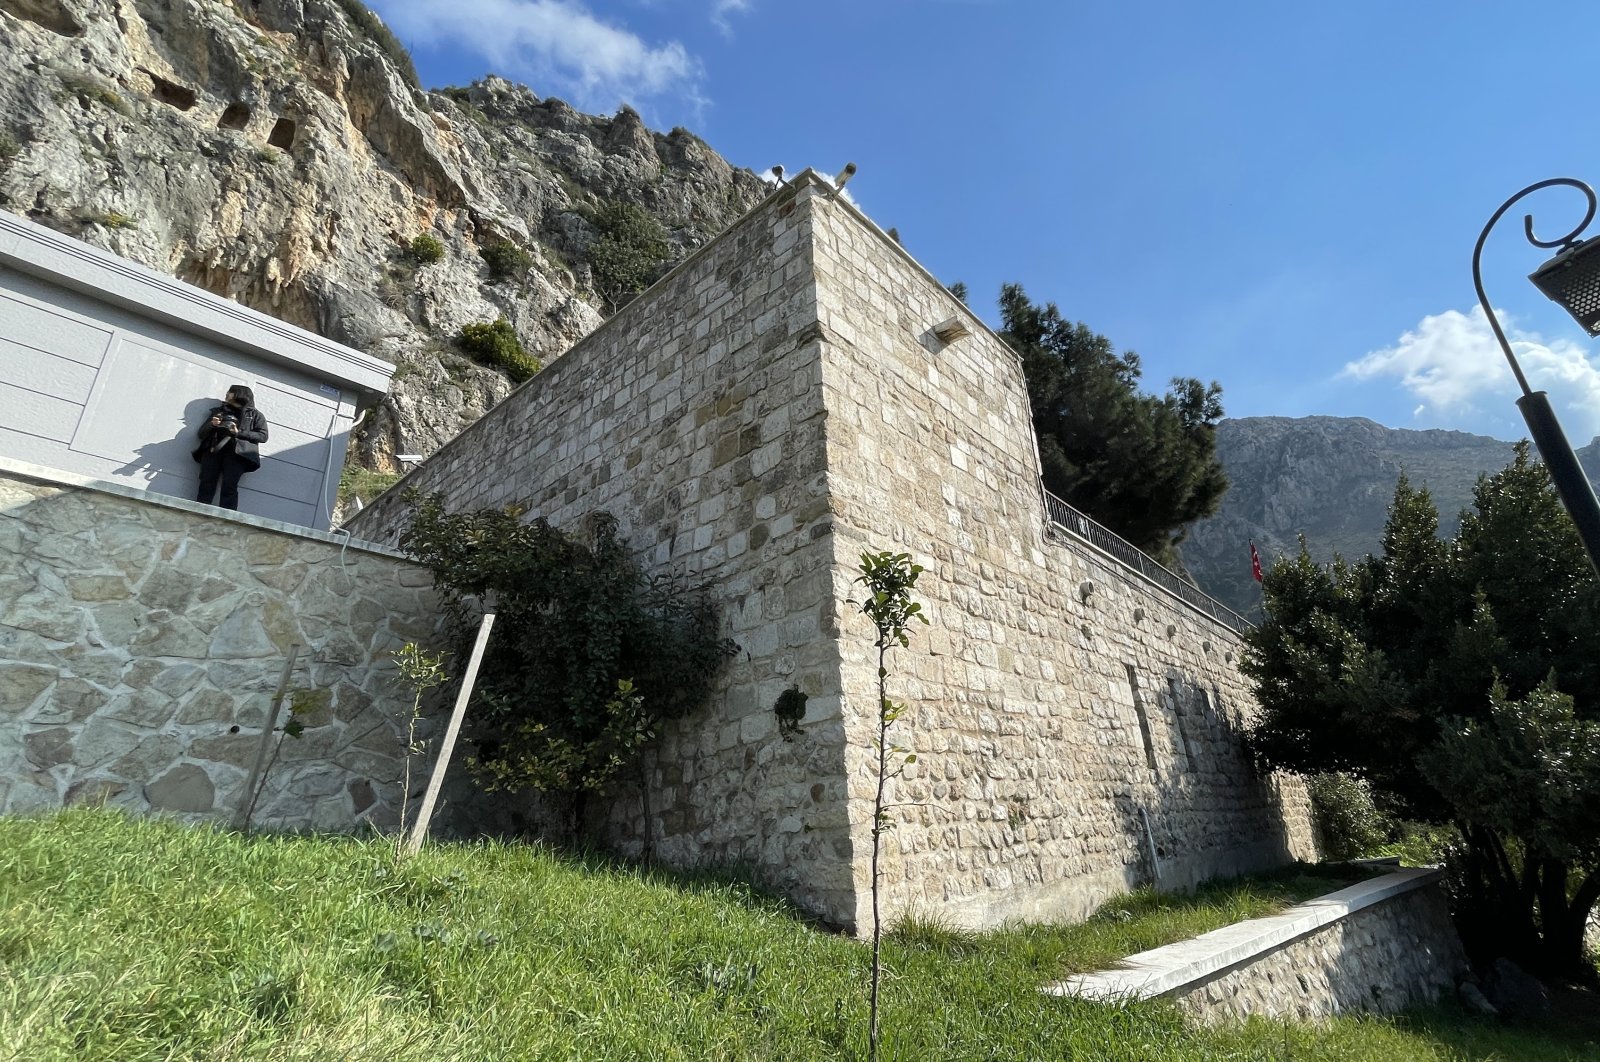 Considered a place of pilgrimage for Christians in Hatay and being &quot;the world&#039;s first cave church,&quot; St. Pierre Church survived the earthquakes in Kahramanmaraş, except for minor damage to the garden wall, Hatay, Türkiye, Feb. 18, 2023. (AA Photo)